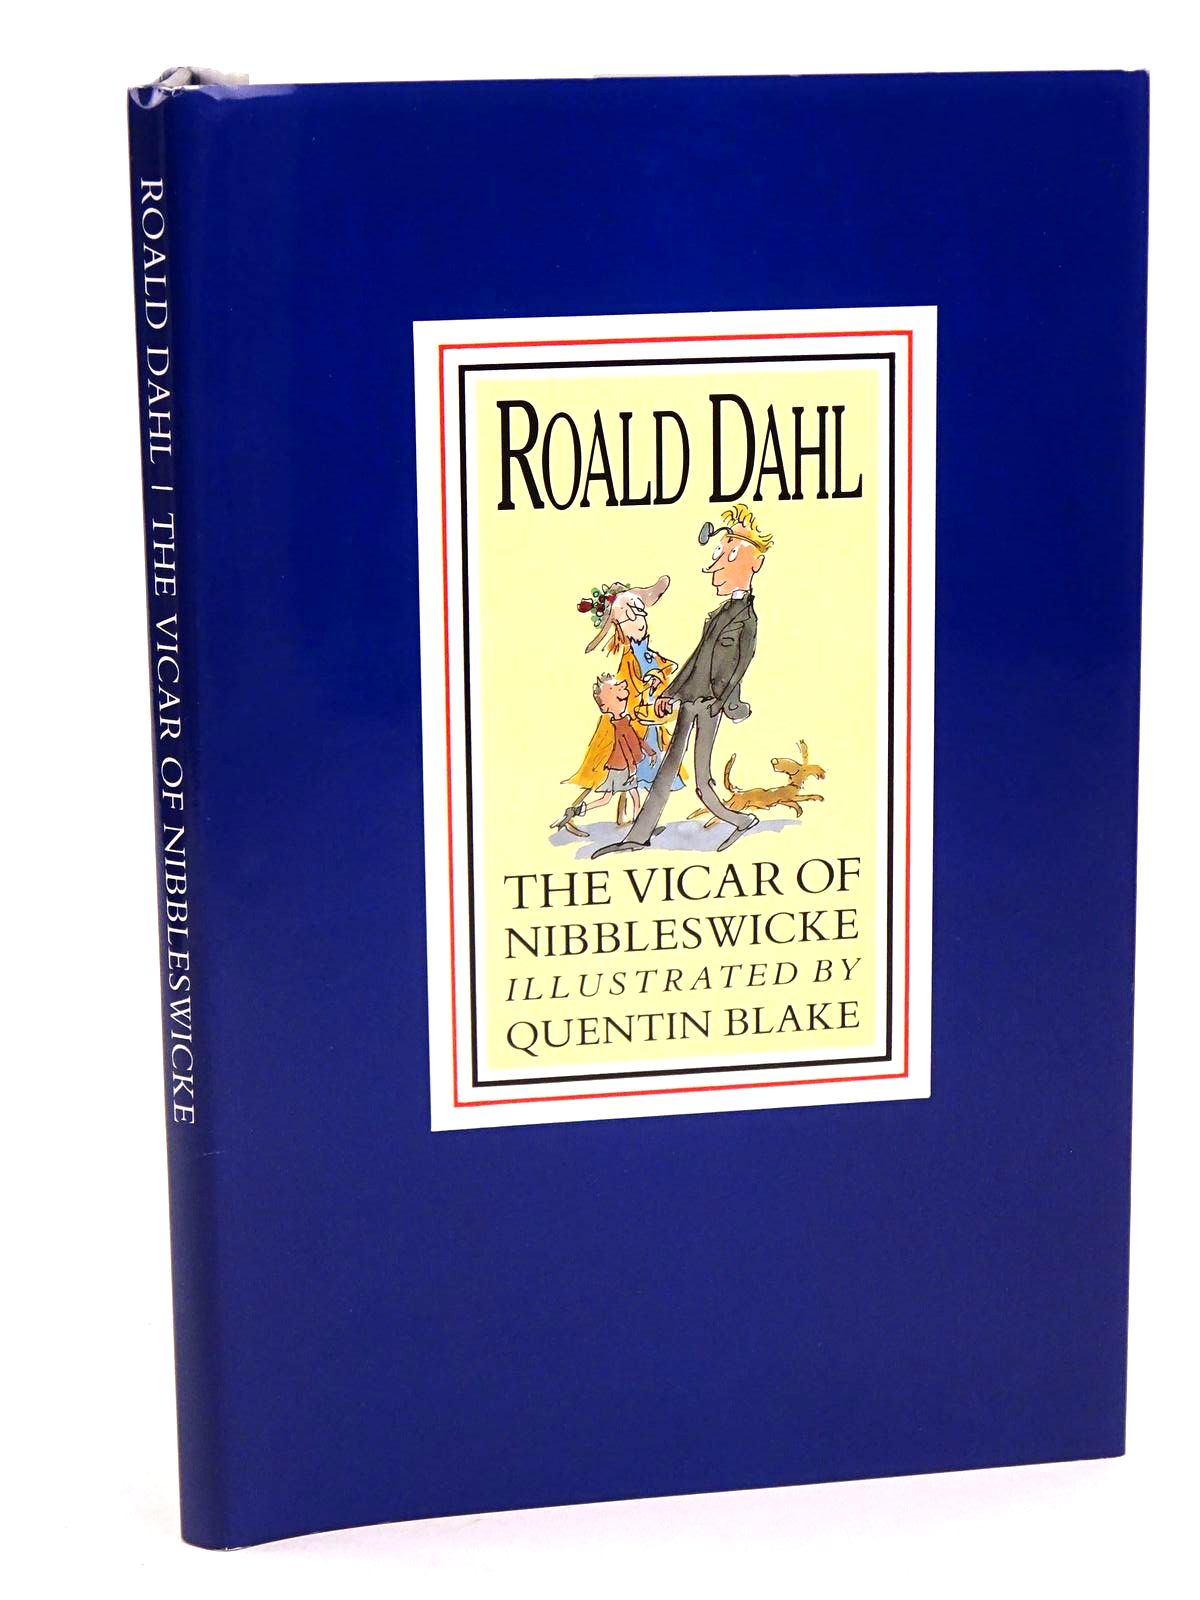 Photo of THE VICAR OF NIBBLESWICKE written by Dahl, Roald illustrated by Blake, Quentin published by Century Publishing (STOCK CODE: 1318085)  for sale by Stella & Rose's Books